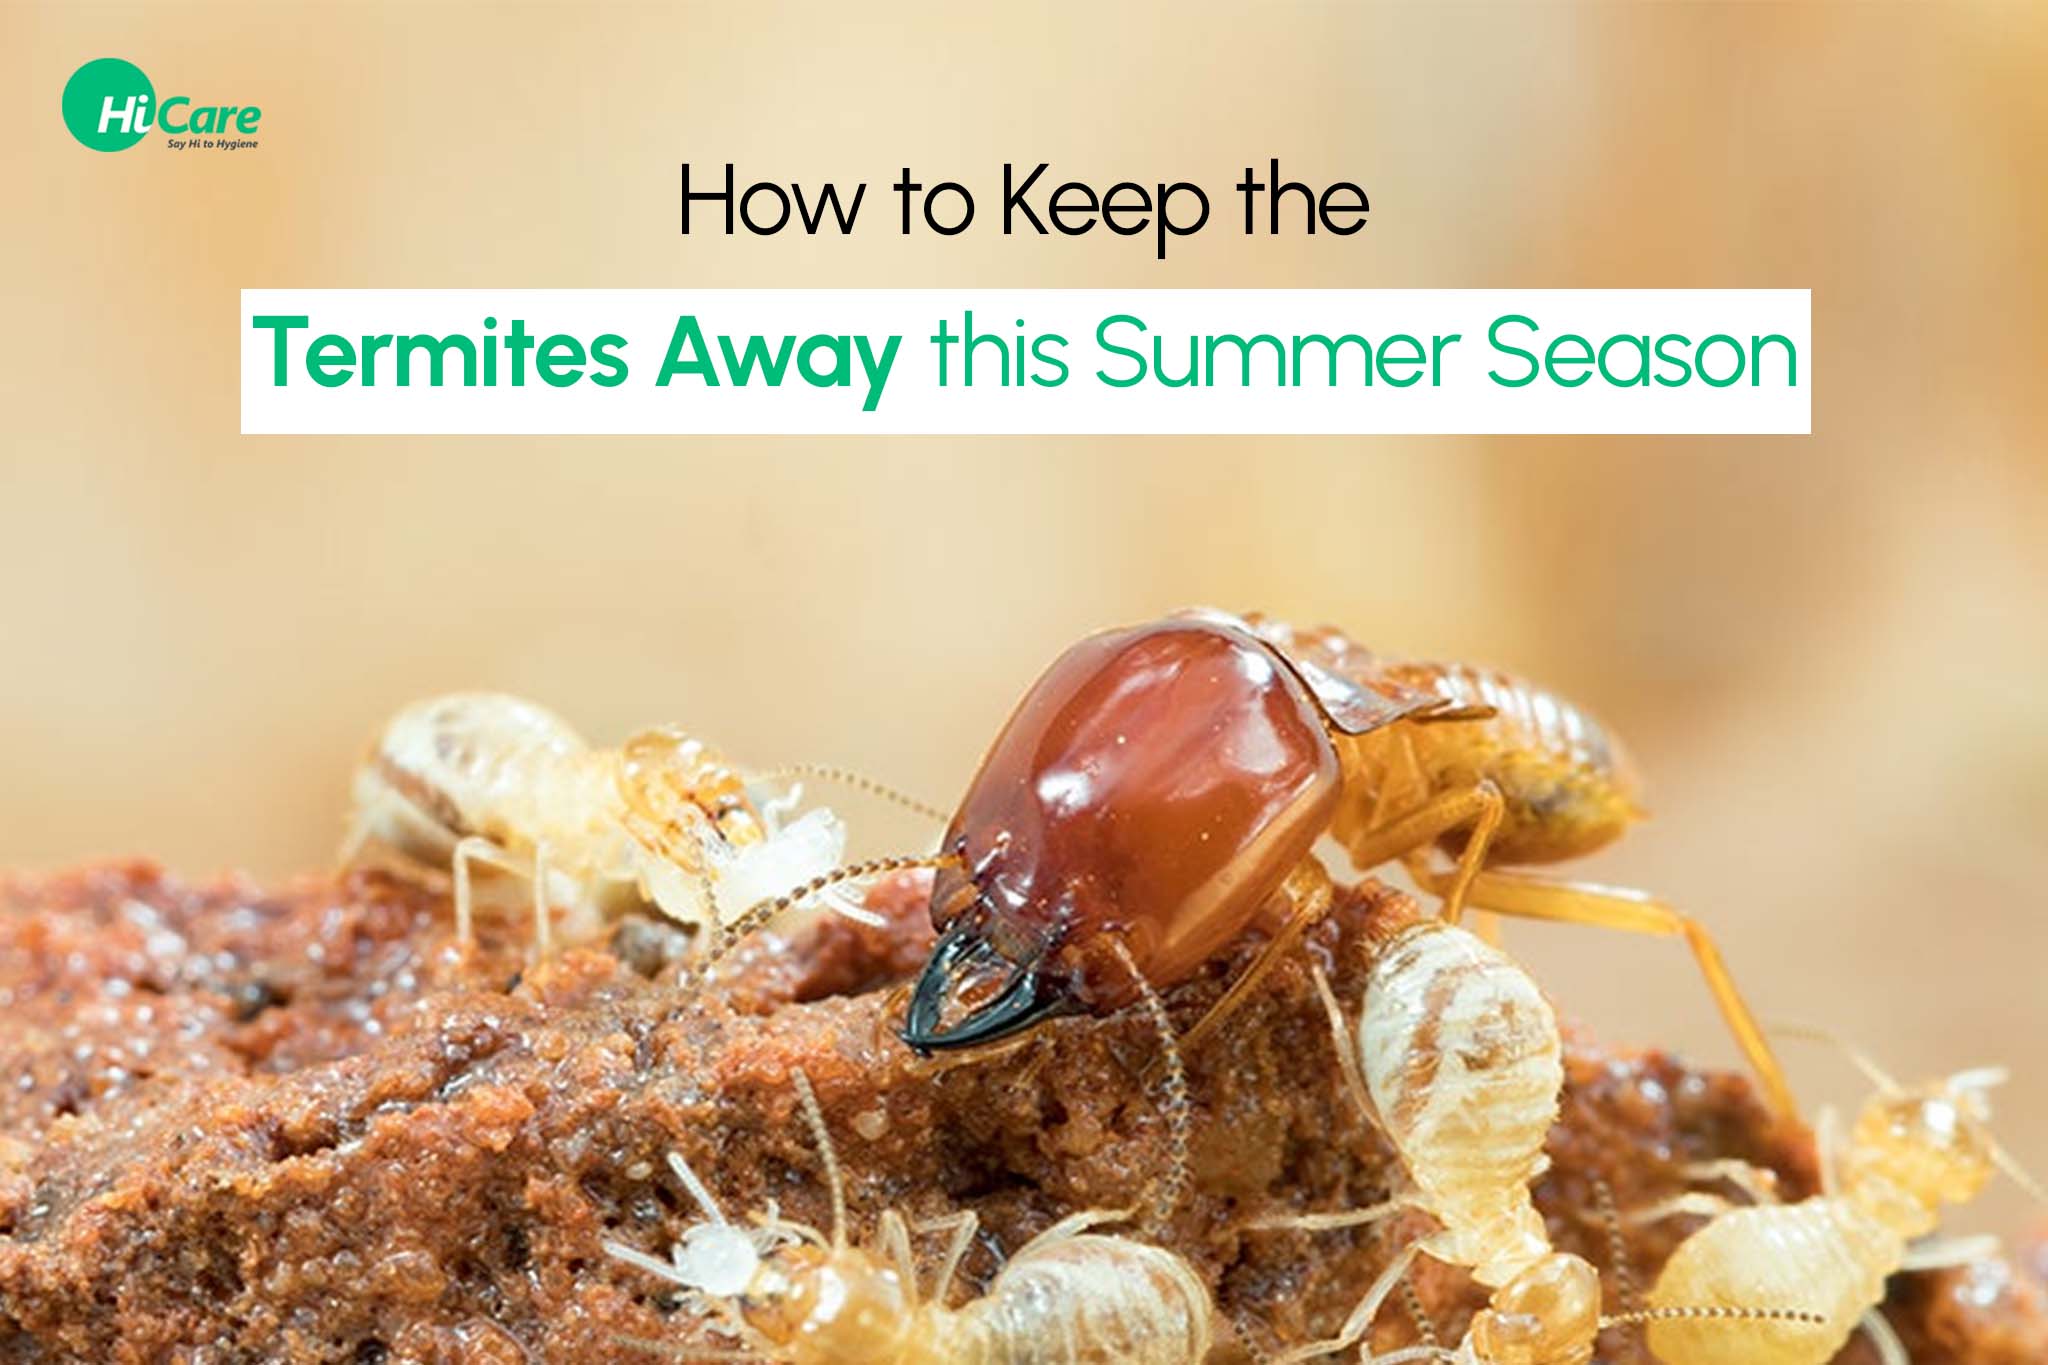 How to Keep the Termites Away this Summer Season?